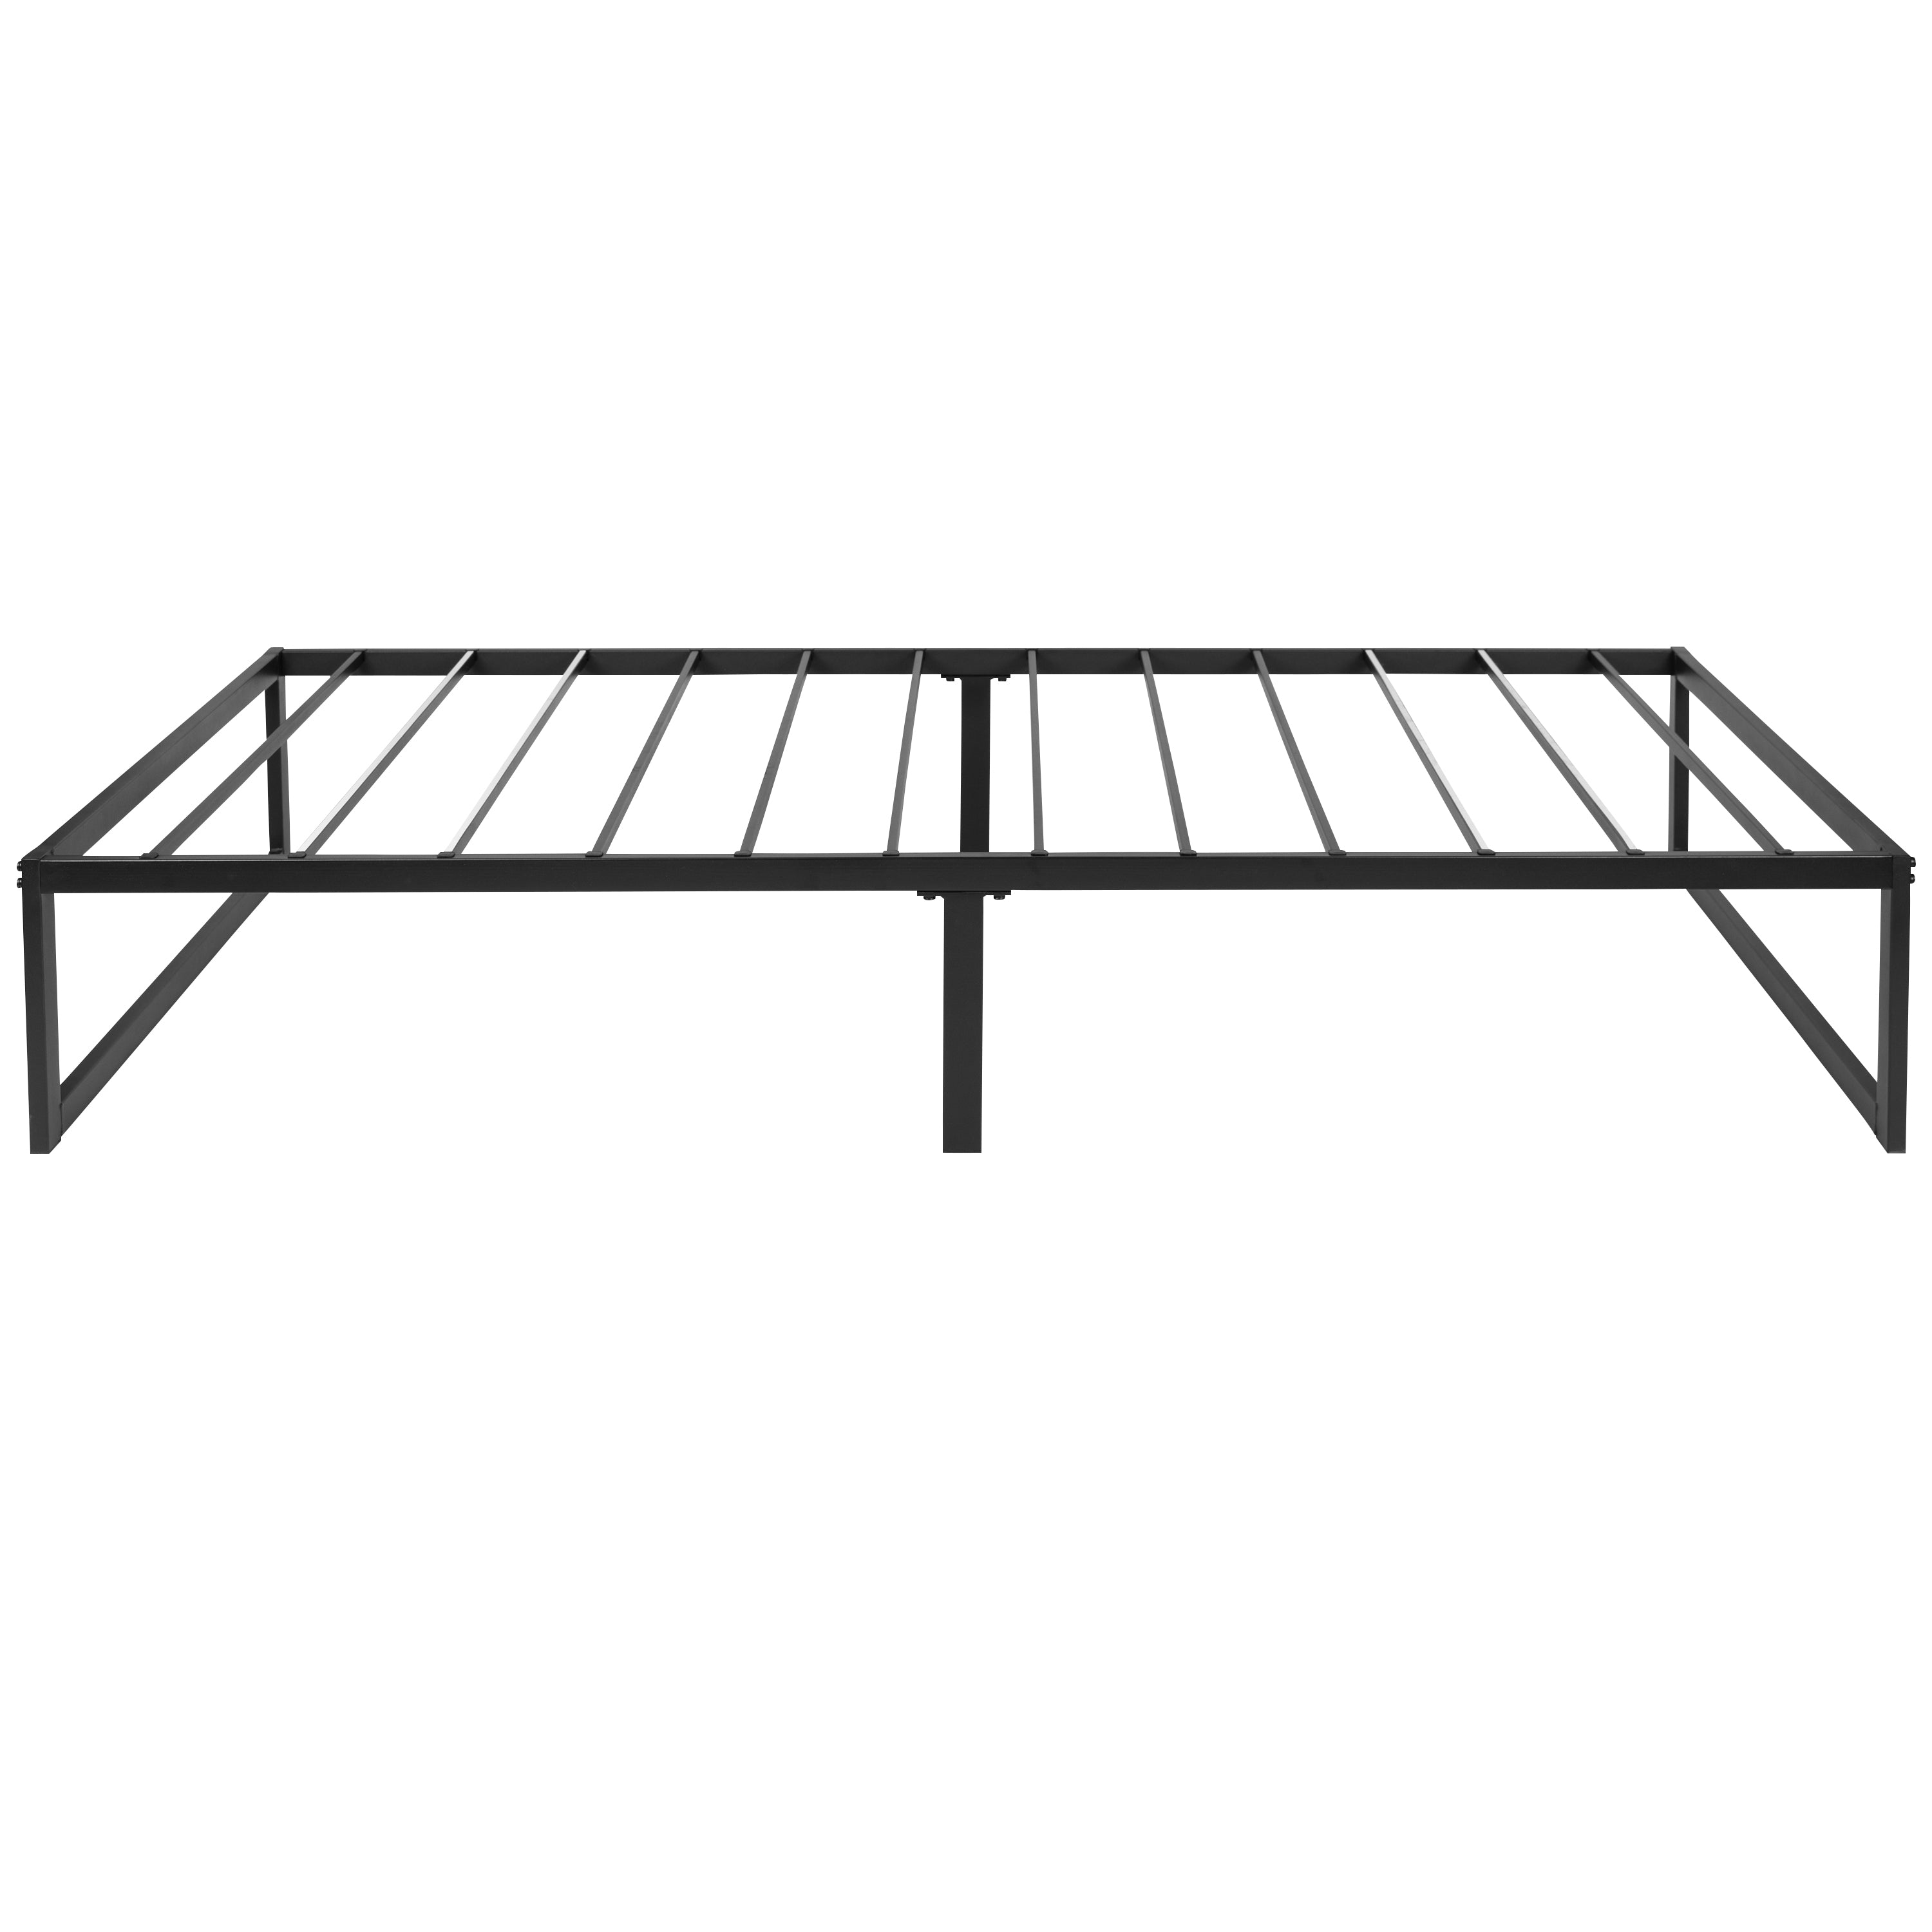 14 Inch Metal Platform Bed Frame with 12 Inch Pocket Spring Mattress in a Box (No Box Spring Required)-Bed & Mattress-Flash Furniture-Wall2Wall Furnishings